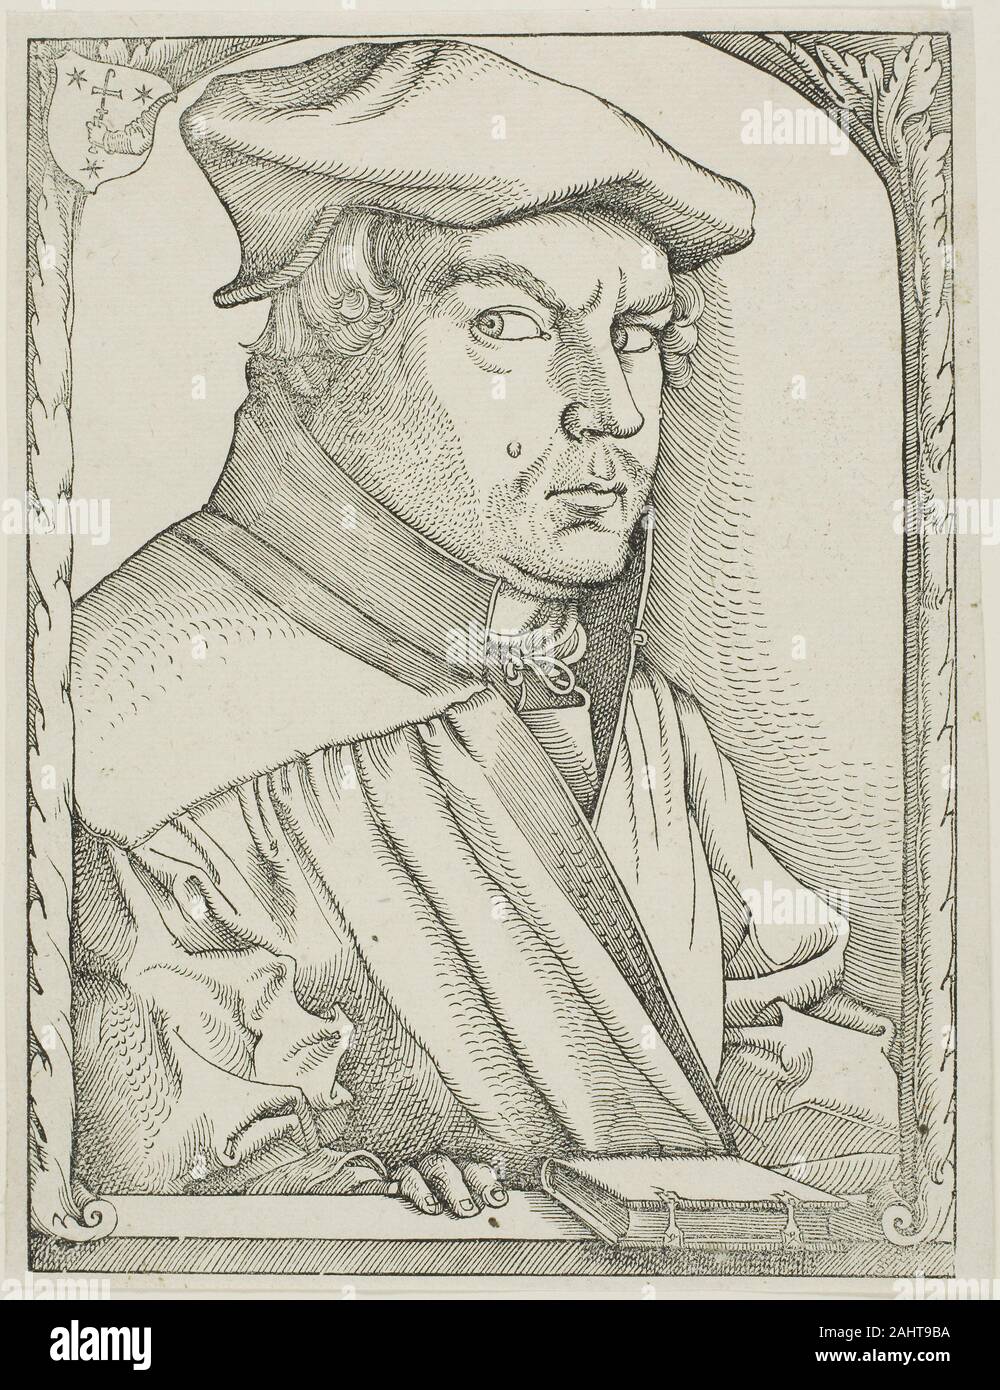 Hans Baldung Grien. Caspar Hedio. 1543. Germany. Woodcut in black on ivory laid paper Here Hans Baldung Grien depicted the theologian Caspar Hedio, who may have been a longtime acquaintance of the artist, as an uncompromising individual with an intense gaze. The woodcut appeared as the author portrait in Hedio’s Selected Chronicle of the World, from Its Beginnings until the Year 1543. Hedio’s furrowed brow, darting eyes, and clenched fingertips reveal his aggressive character, an effect greatly enhanced by the change from the original soft silverpoint drawing to these harsh woodcut lines. A le Stock Photo